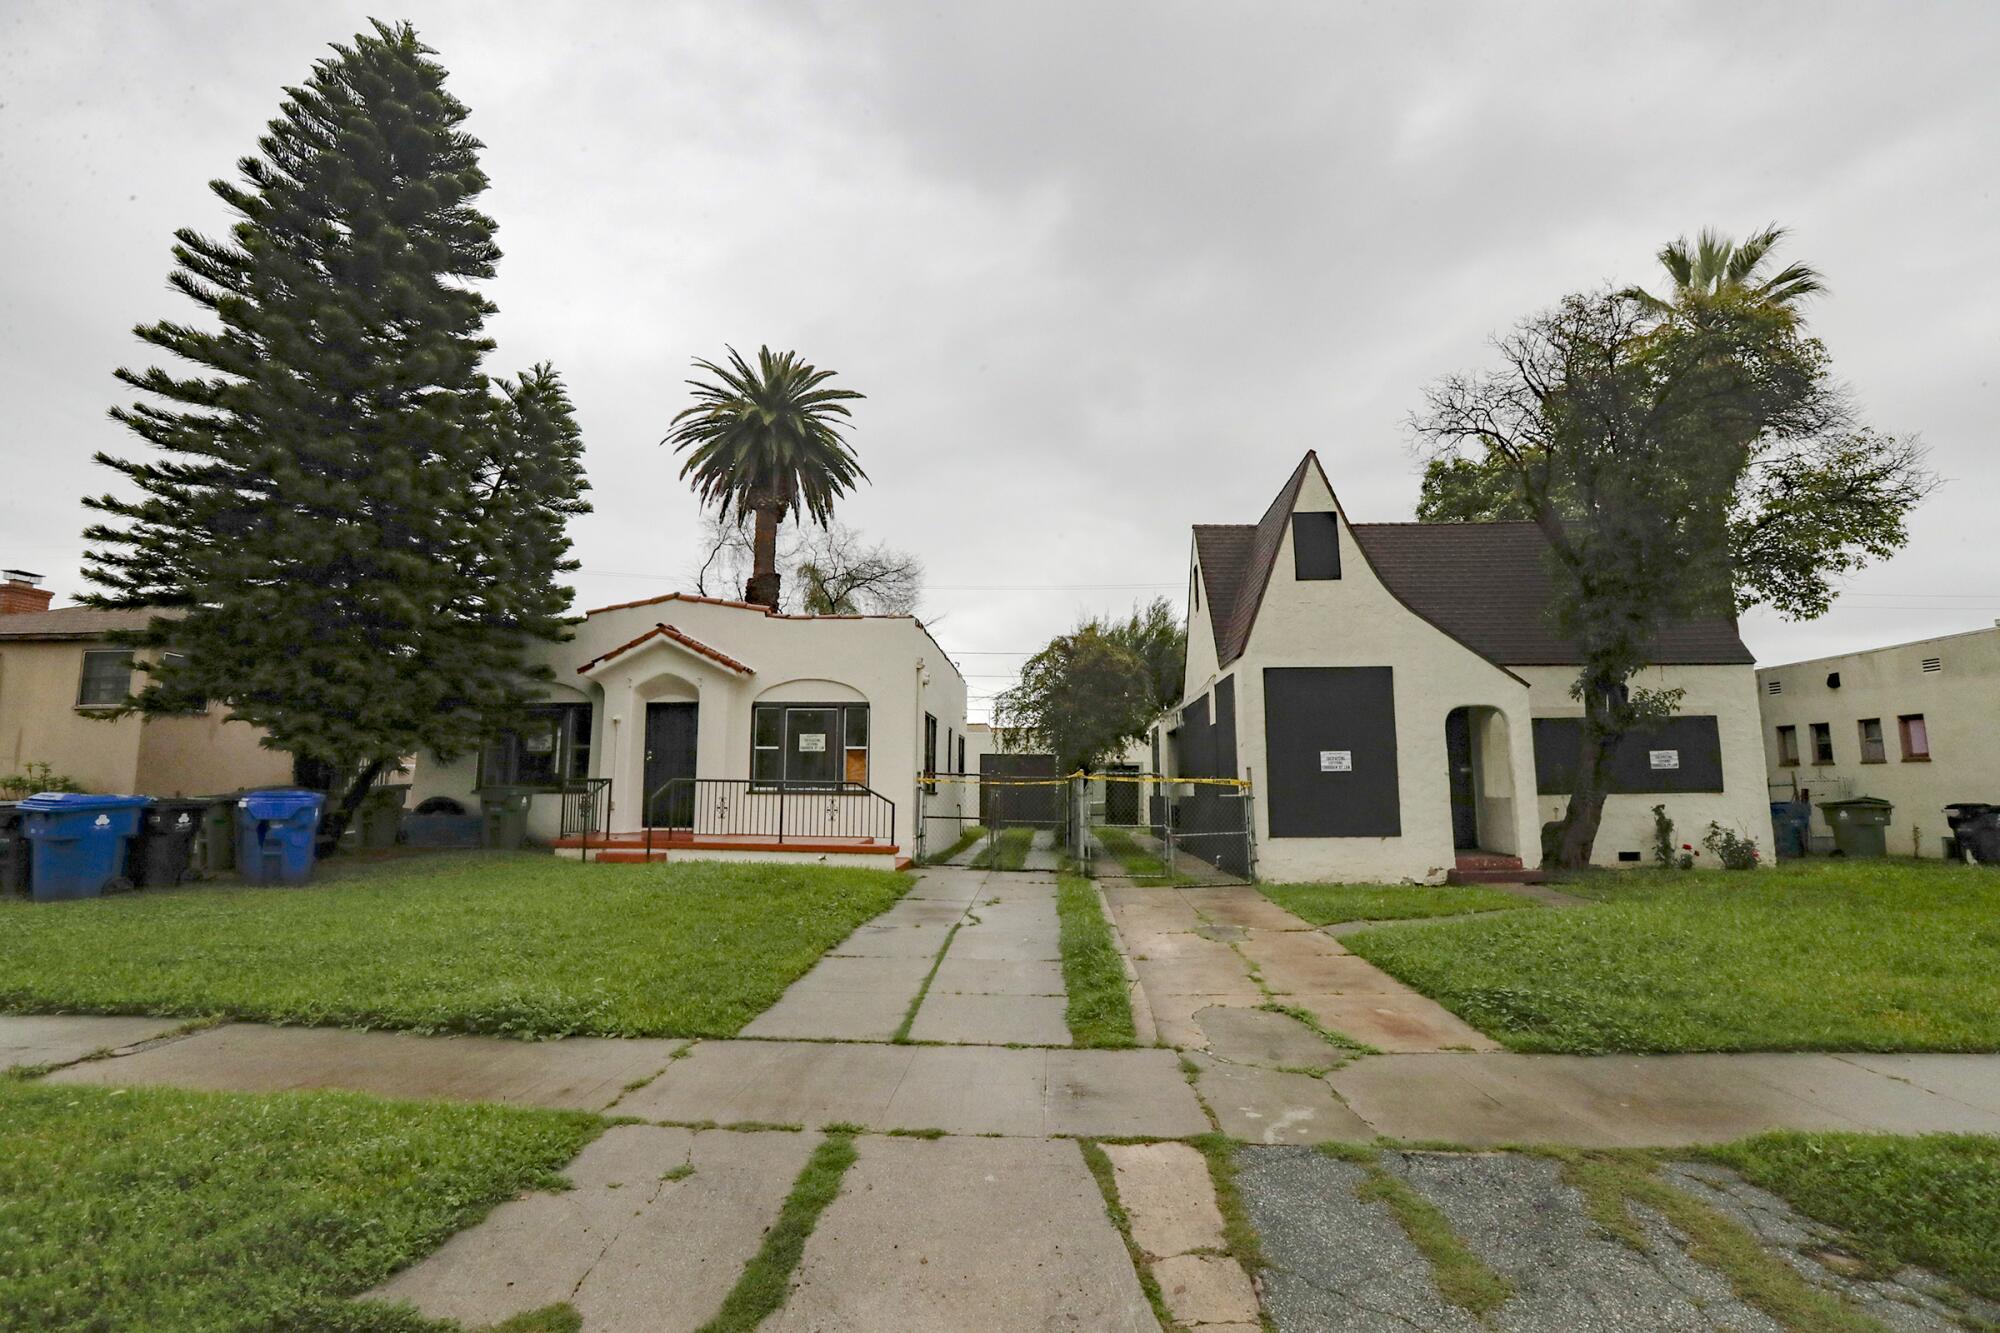 A view of the front of two houses from the street in El Sereno.